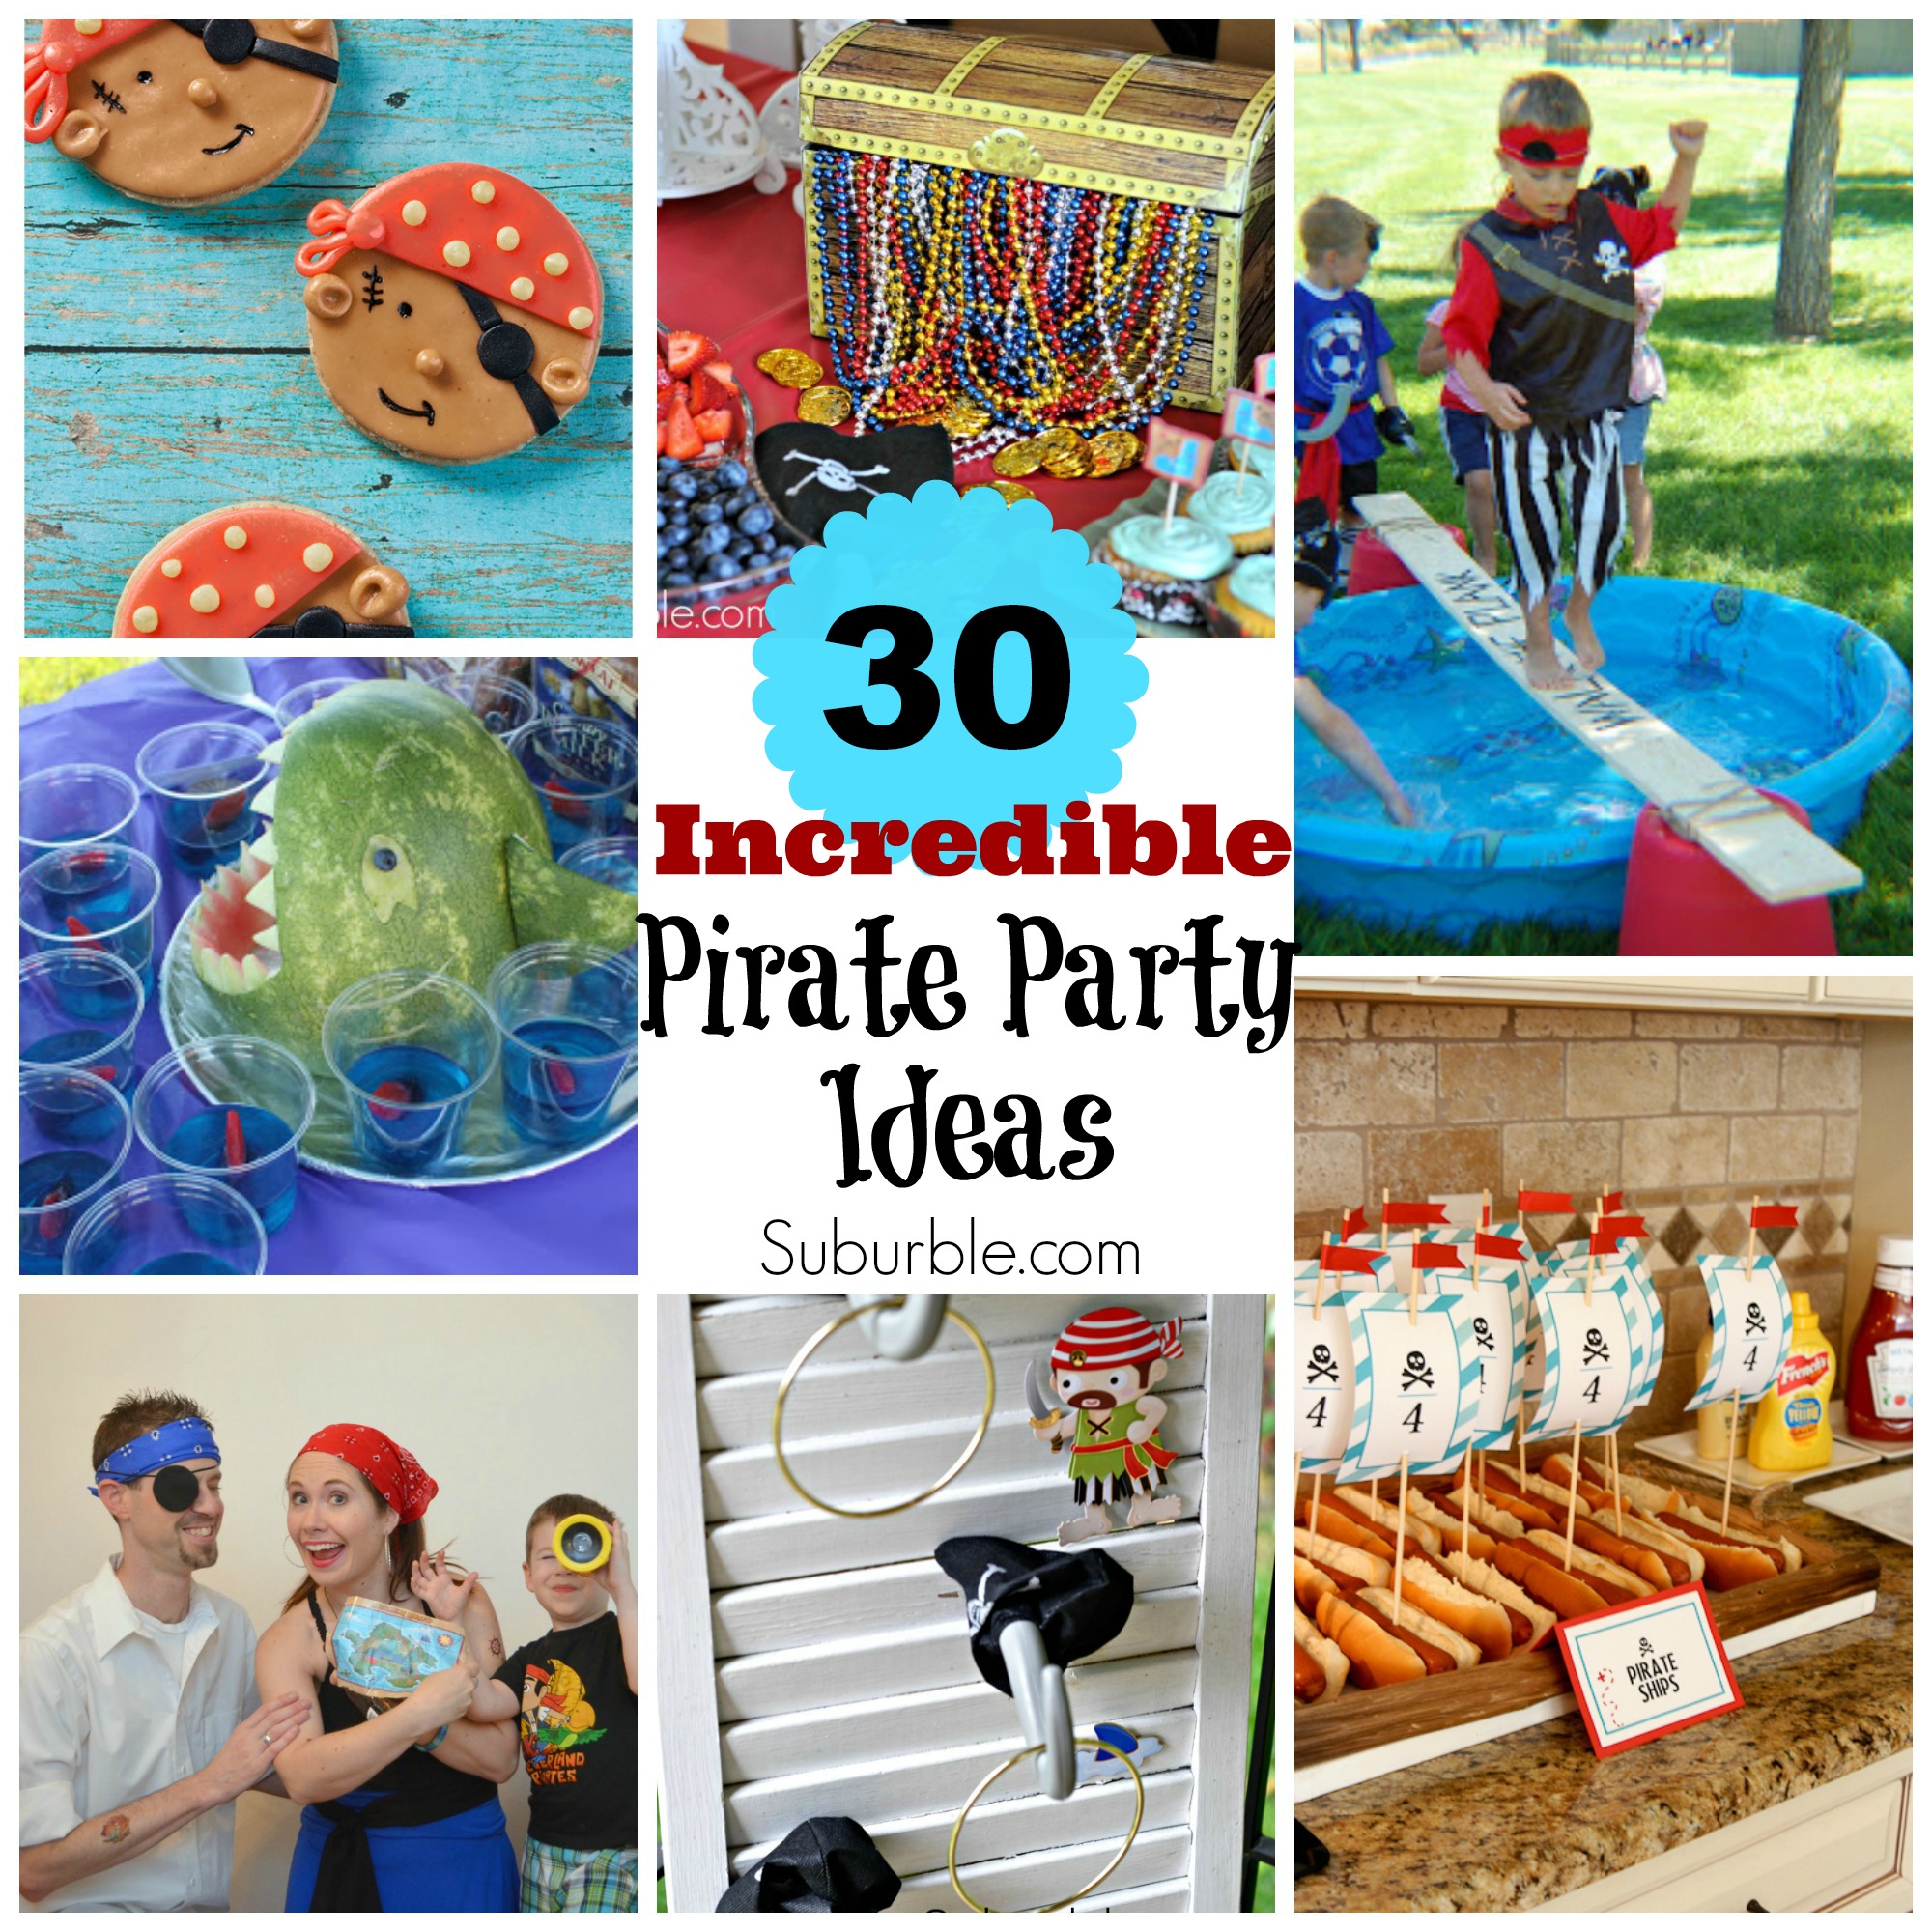 30 Incredible Pirate Party Ideas - Suburble